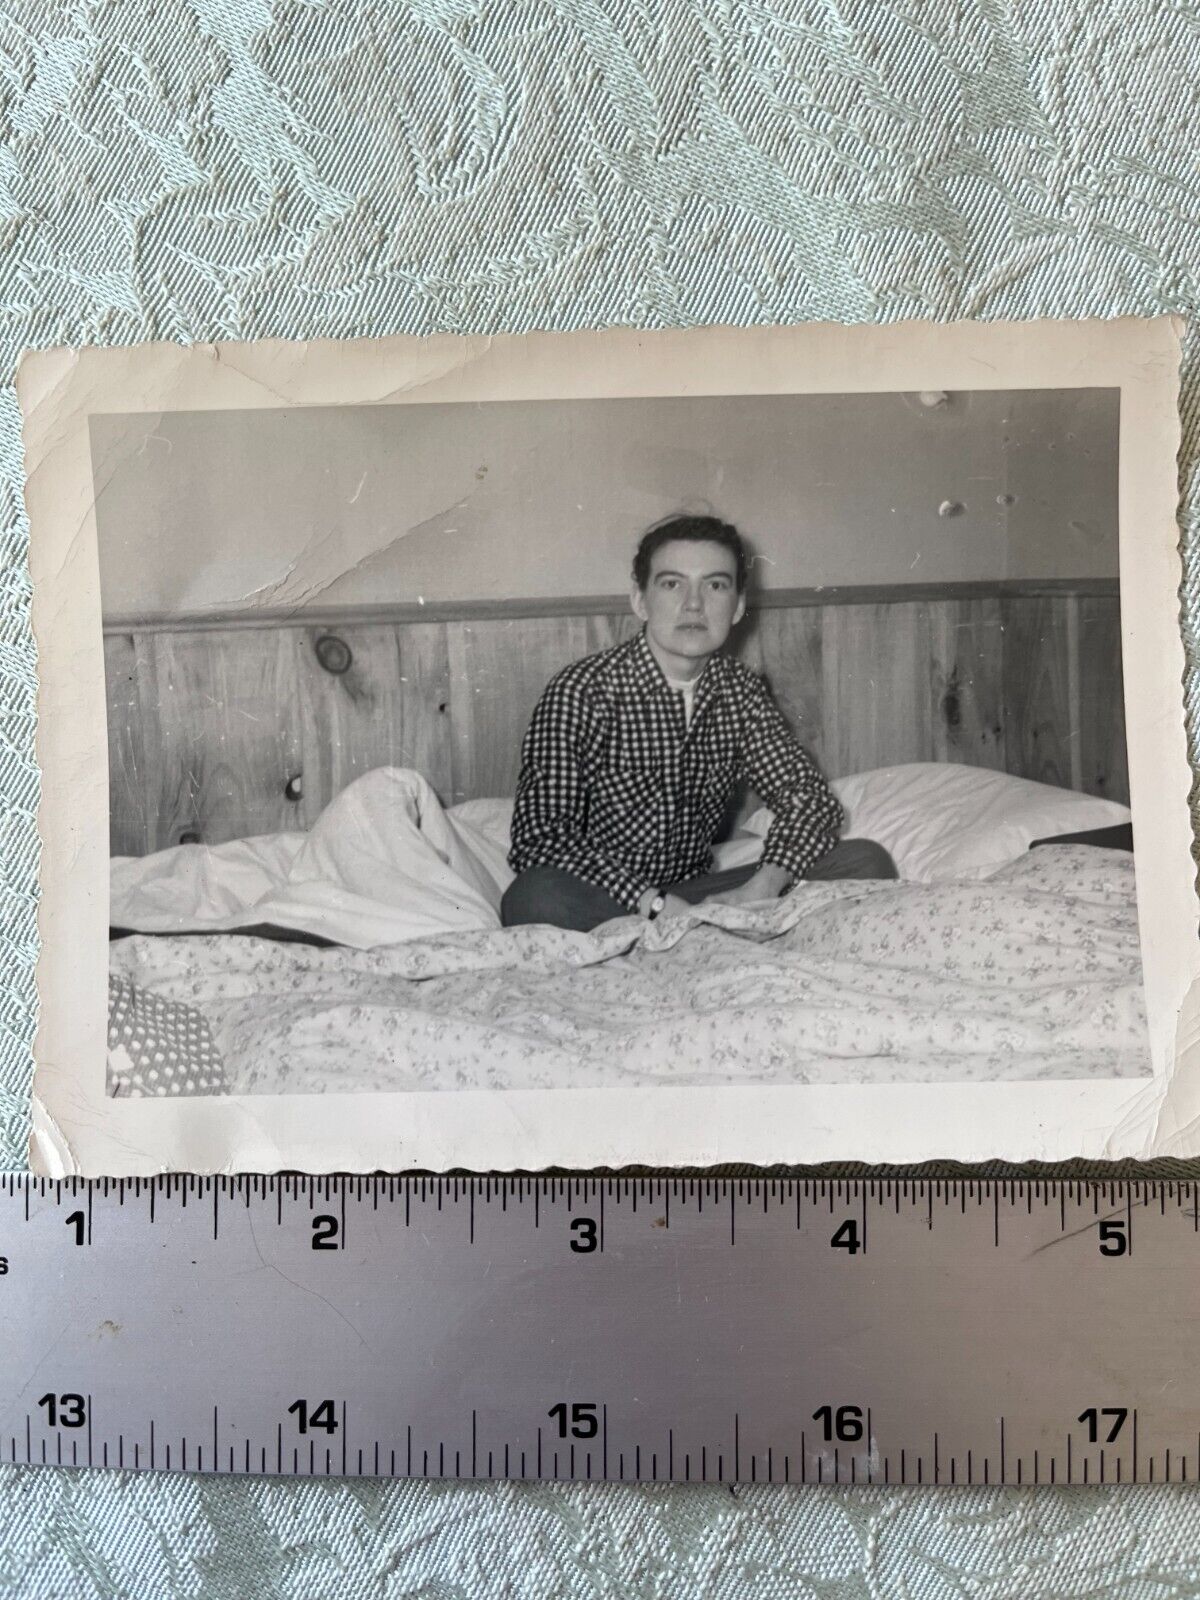 Snapshot of Tough Woman in a Bed - Lesbian Interest - 1940s